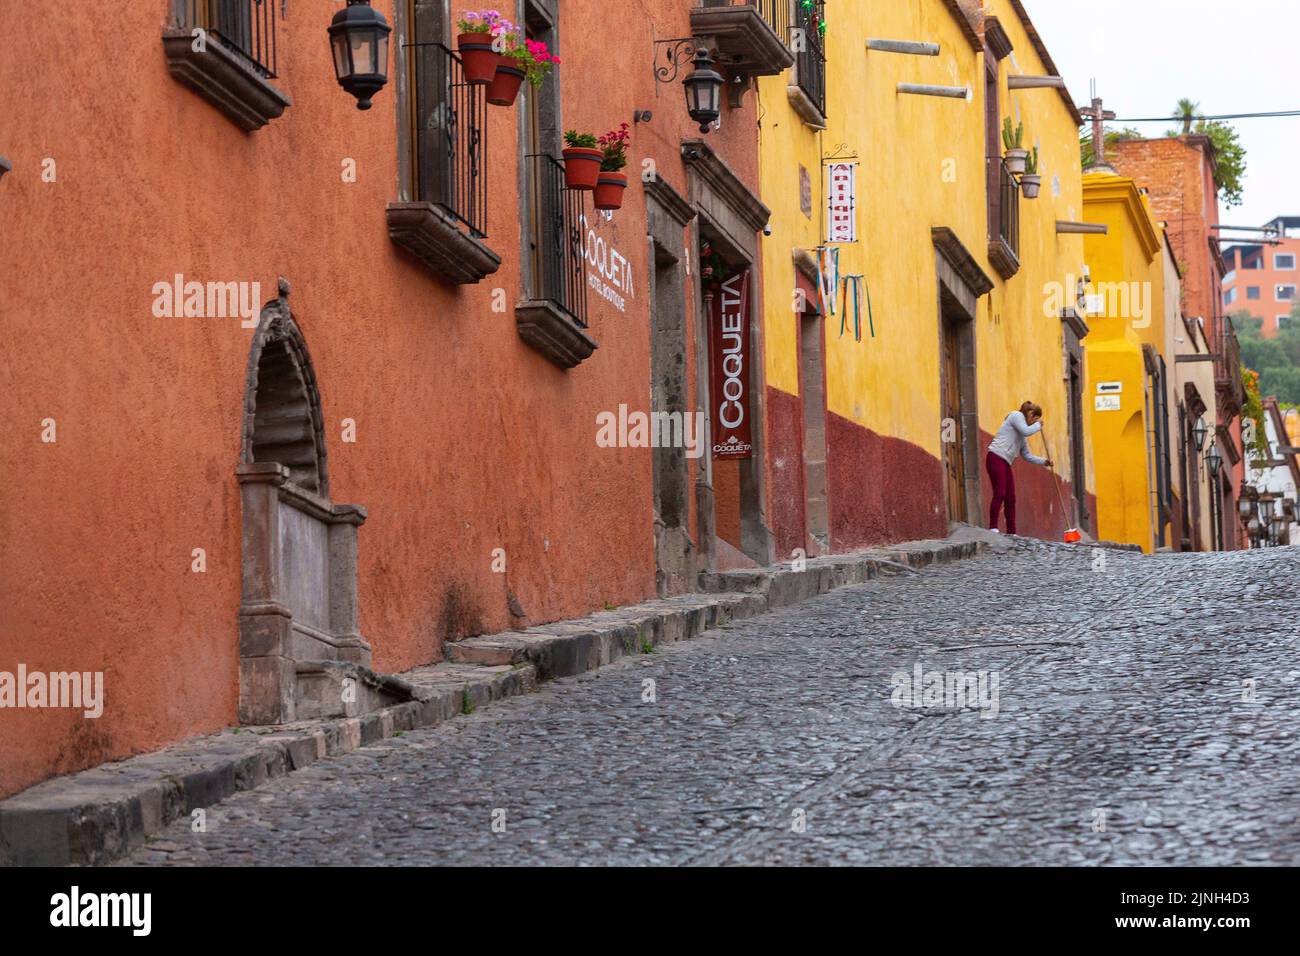 A woman sweeps the walkway on Calle Cuadrante lined with colorful Spanish colonial style buildings in the historic city center of San Miguel de Allende, Mexico. Stock Photo